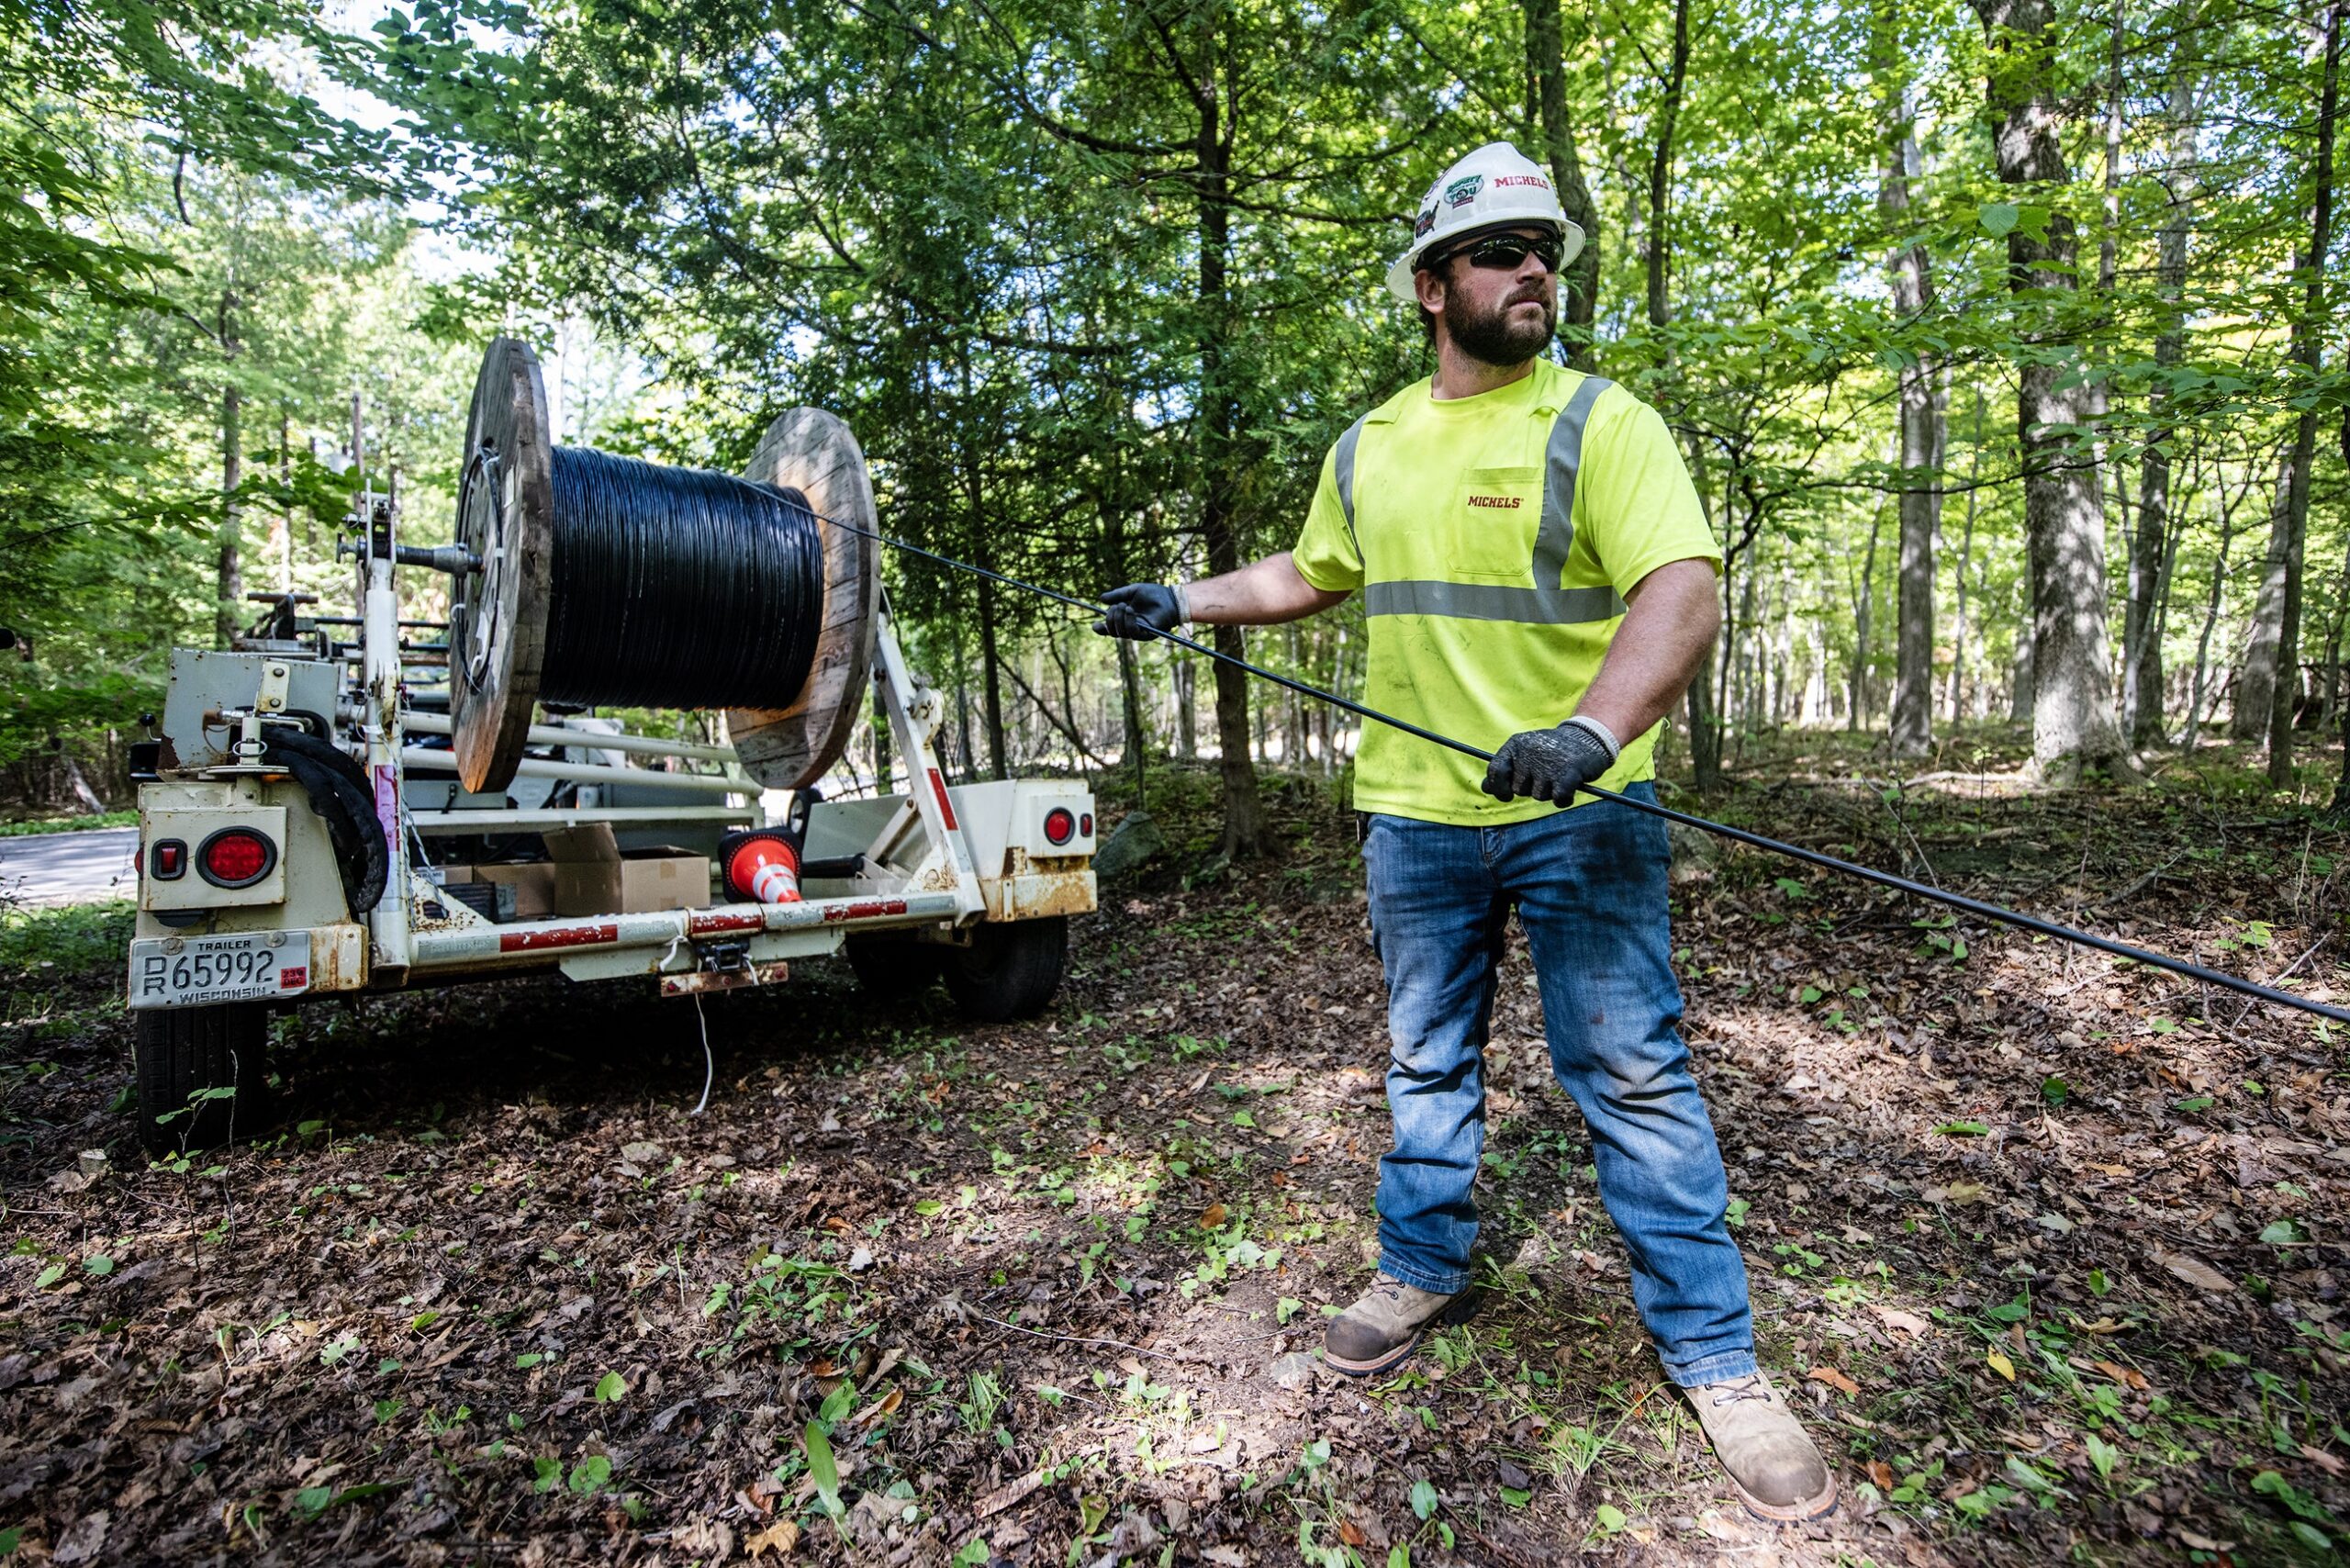 One of Wisconsin’s most isolated places is finally getting fast internet